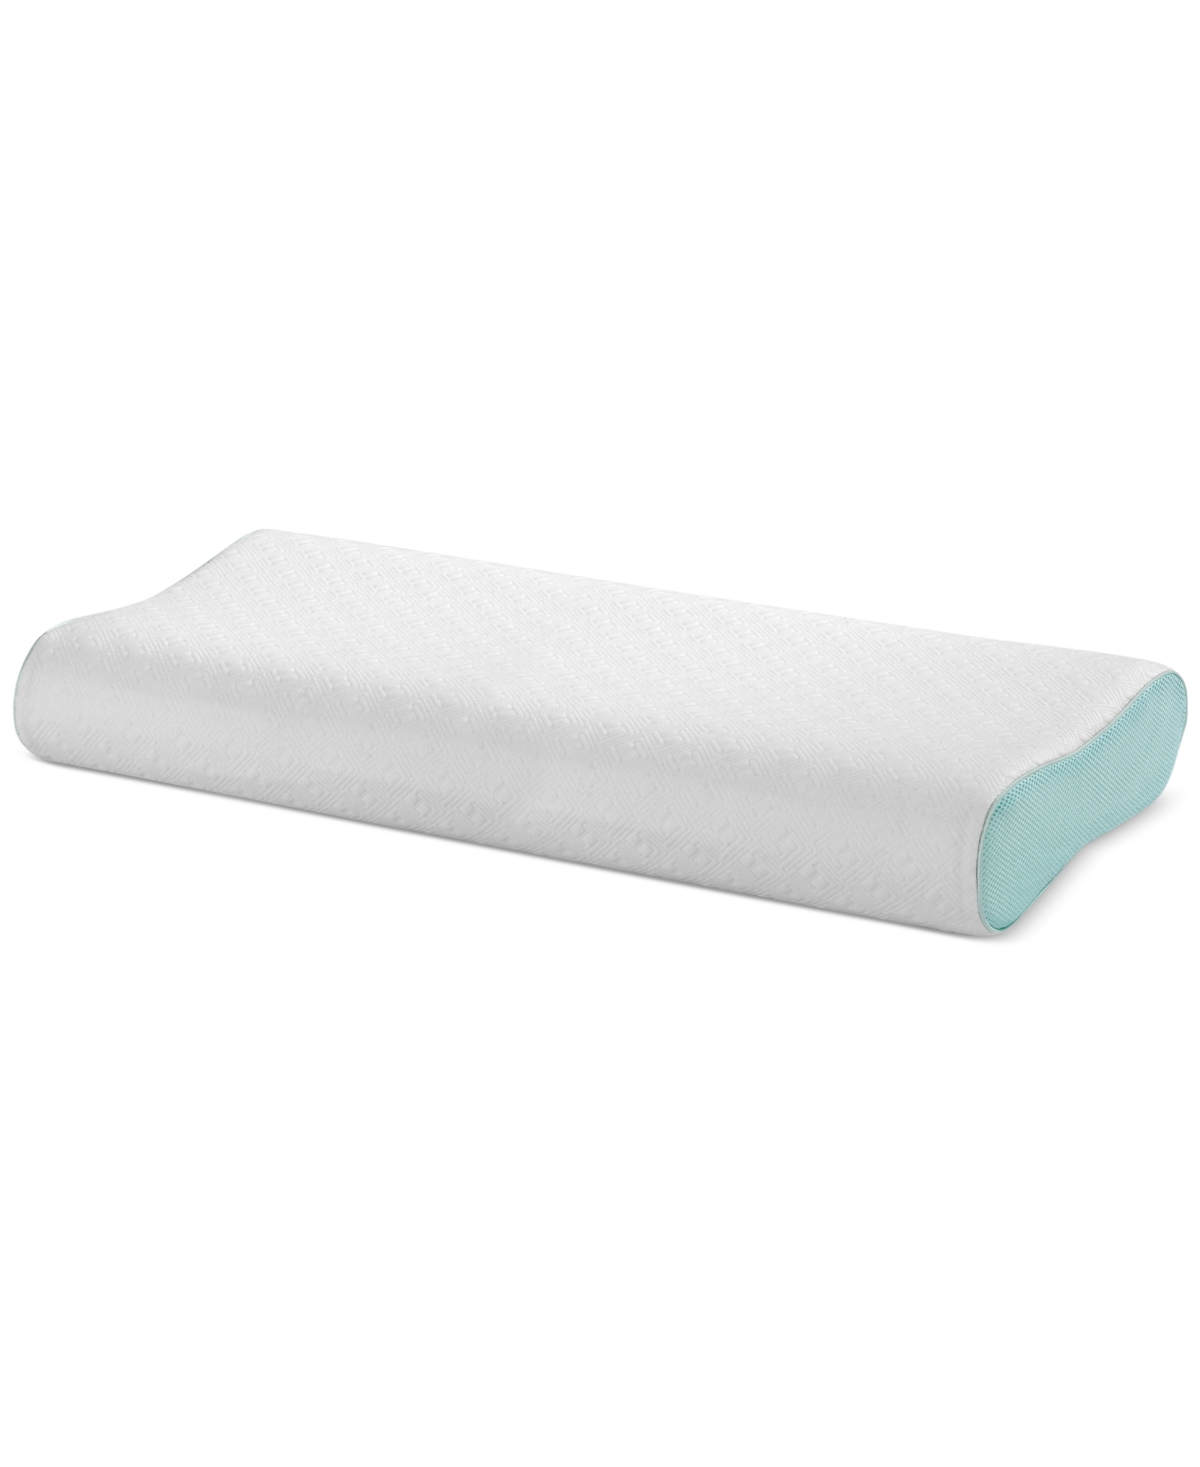 Intellisleep Natural Comfort Contour Memory Foam Pillow, King, Created For Macy's In White With Green Mesh Gusset